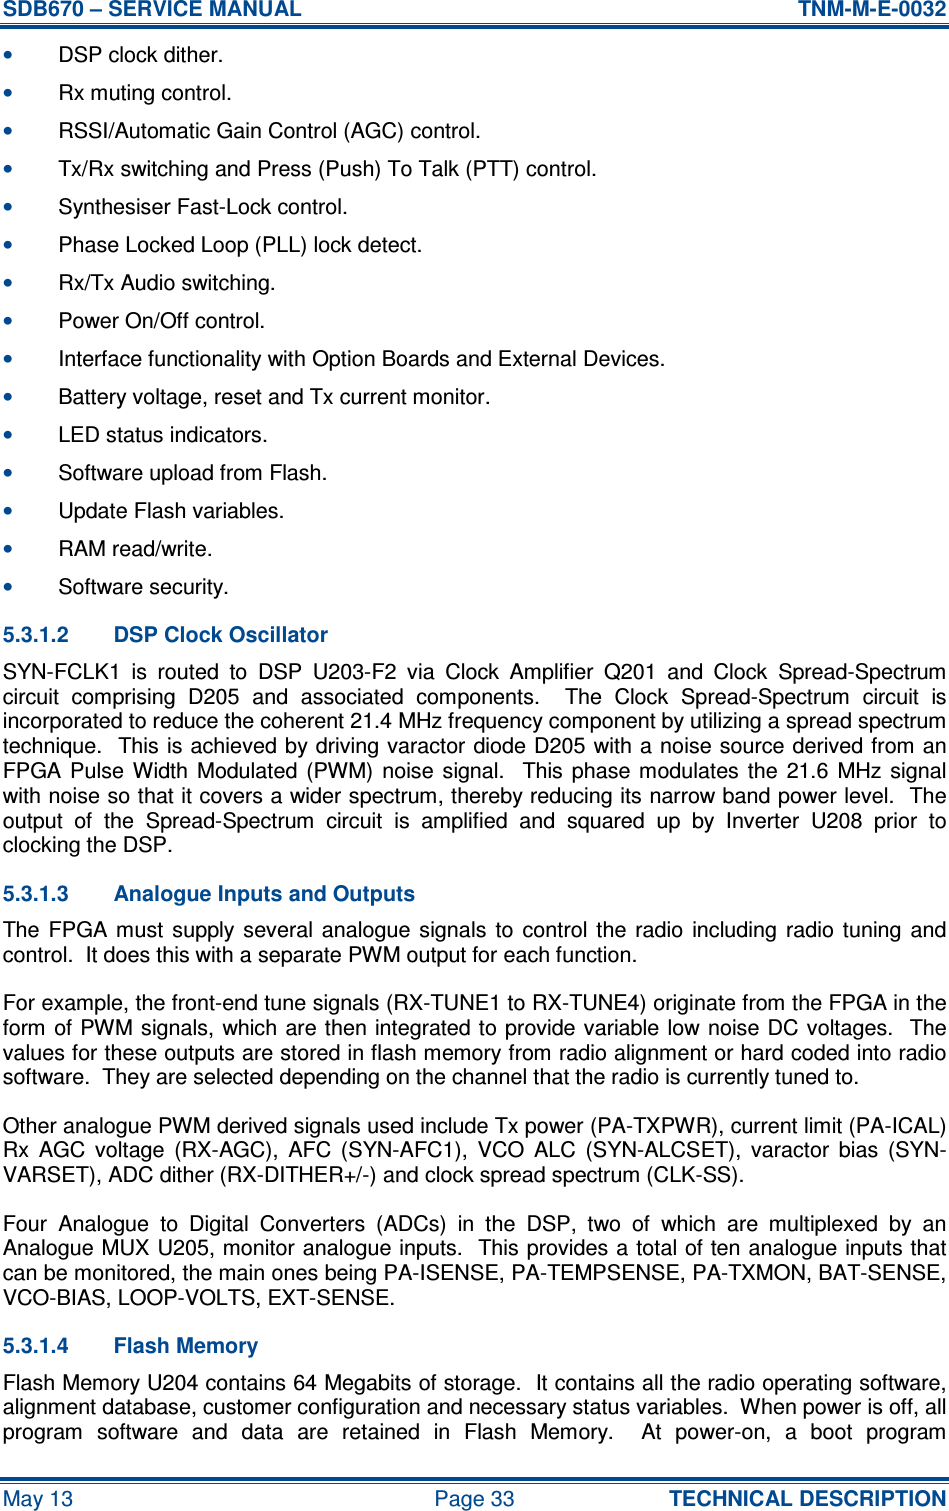 SDB670 – SERVICE MANUAL  TNM-M-E-0032 May 13  Page 33  TECHNICAL DESCRIPTION • DSP clock dither. • Rx muting control. • RSSI/Automatic Gain Control (AGC) control. • Tx/Rx switching and Press (Push) To Talk (PTT) control. • Synthesiser Fast-Lock control. • Phase Locked Loop (PLL) lock detect. • Rx/Tx Audio switching. • Power On/Off control. • Interface functionality with Option Boards and External Devices. • Battery voltage, reset and Tx current monitor. • LED status indicators. • Software upload from Flash. • Update Flash variables. • RAM read/write. • Software security. 5.3.1.2  DSP Clock Oscillator SYN-FCLK1  is  routed  to  DSP  U203-F2  via  Clock  Amplifier  Q201  and  Clock  Spread-Spectrum circuit  comprising  D205  and  associated  components.    The  Clock  Spread-Spectrum  circuit  is incorporated to reduce the coherent 21.4 MHz frequency component by utilizing a spread spectrum technique.  This is achieved by driving varactor diode D205 with a noise source derived from an FPGA Pulse  Width  Modulated  (PWM)  noise  signal.   This phase modulates  the  21.6  MHz  signal with noise so that it covers a wider spectrum, thereby reducing its narrow band power level.  The output  of  the  Spread-Spectrum  circuit  is  amplified  and  squared  up  by  Inverter  U208  prior  to clocking the DSP. 5.3.1.3  Analogue Inputs and Outputs The FPGA  must  supply  several  analogue  signals  to  control  the  radio  including  radio  tuning  and control.  It does this with a separate PWM output for each function. For example, the front-end tune signals (RX-TUNE1 to RX-TUNE4) originate from the FPGA in the form of PWM signals, which are then integrated to provide variable low noise DC voltages.  The values for these outputs are stored in flash memory from radio alignment or hard coded into radio software.  They are selected depending on the channel that the radio is currently tuned to. Other analogue PWM derived signals used include Tx power (PA-TXPWR), current limit (PA-ICAL) Rx  AGC  voltage  (RX-AGC),  AFC  (SYN-AFC1),  VCO  ALC  (SYN-ALCSET),  varactor  bias  (SYN-VARSET), ADC dither (RX-DITHER+/-) and clock spread spectrum (CLK-SS). Four  Analogue  to  Digital  Converters  (ADCs)  in  the  DSP,  two  of  which  are  multiplexed  by  an Analogue MUX U205, monitor analogue inputs.  This provides a total of ten analogue inputs that can be monitored, the main ones being PA-ISENSE, PA-TEMPSENSE, PA-TXMON, BAT-SENSE, VCO-BIAS, LOOP-VOLTS, EXT-SENSE. 5.3.1.4  Flash Memory Flash Memory U204 contains 64 Megabits of storage.  It contains all the radio operating software, alignment database, customer configuration and necessary status variables.  When power is off, all program  software  and  data  are  retained  in  Flash  Memory.    At  power-on,  a  boot  program 